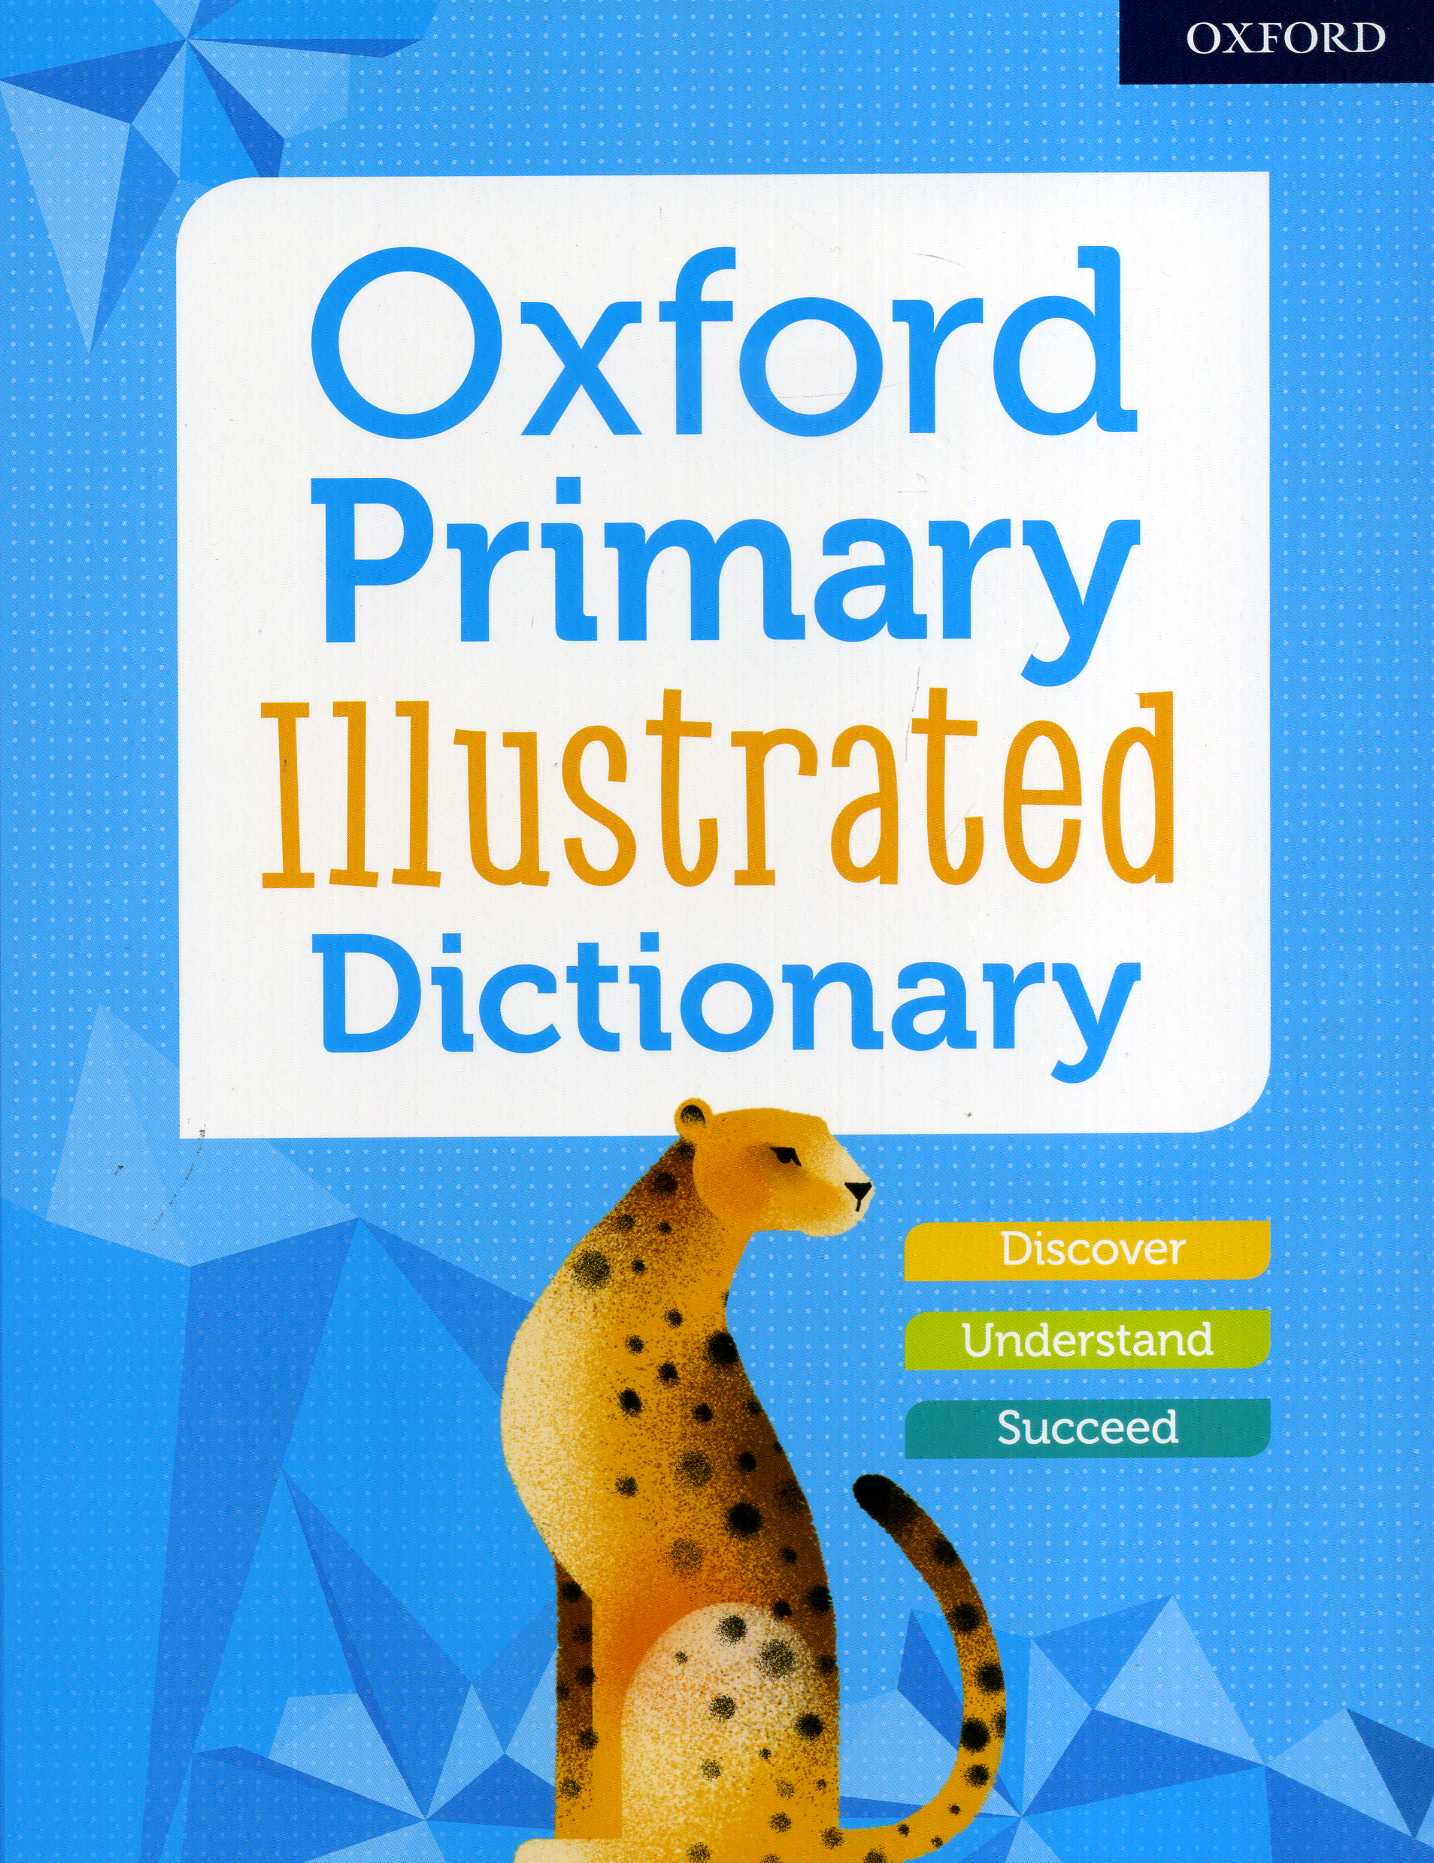 illustrated oxford dictionary pdf free download